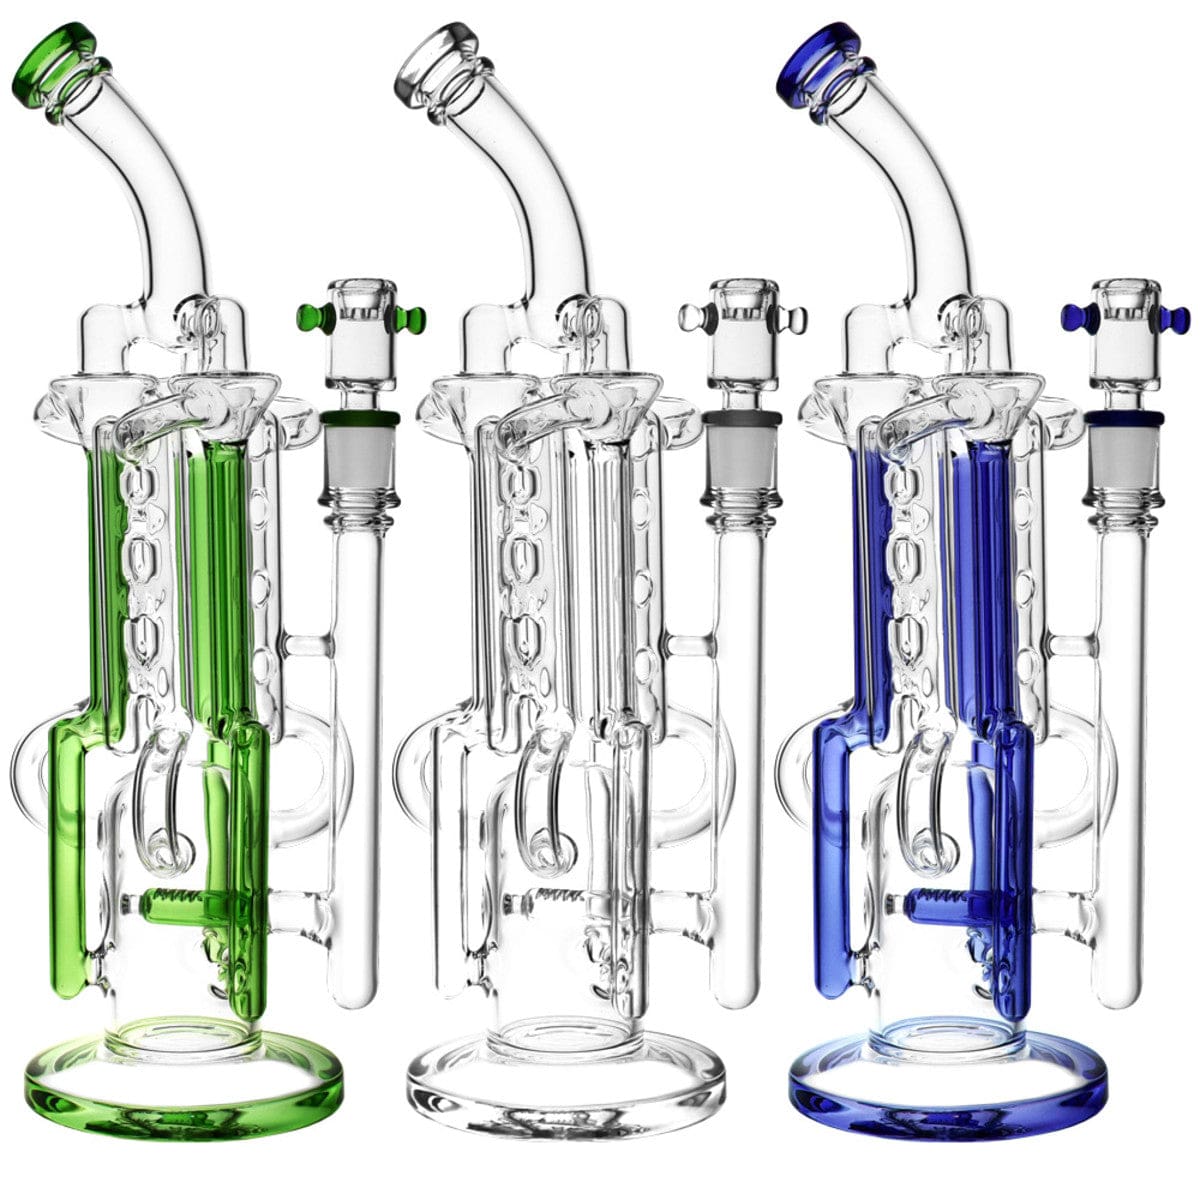 Daily High Club Bong The "Space Station" Recycler Water Bong with Inline Perc